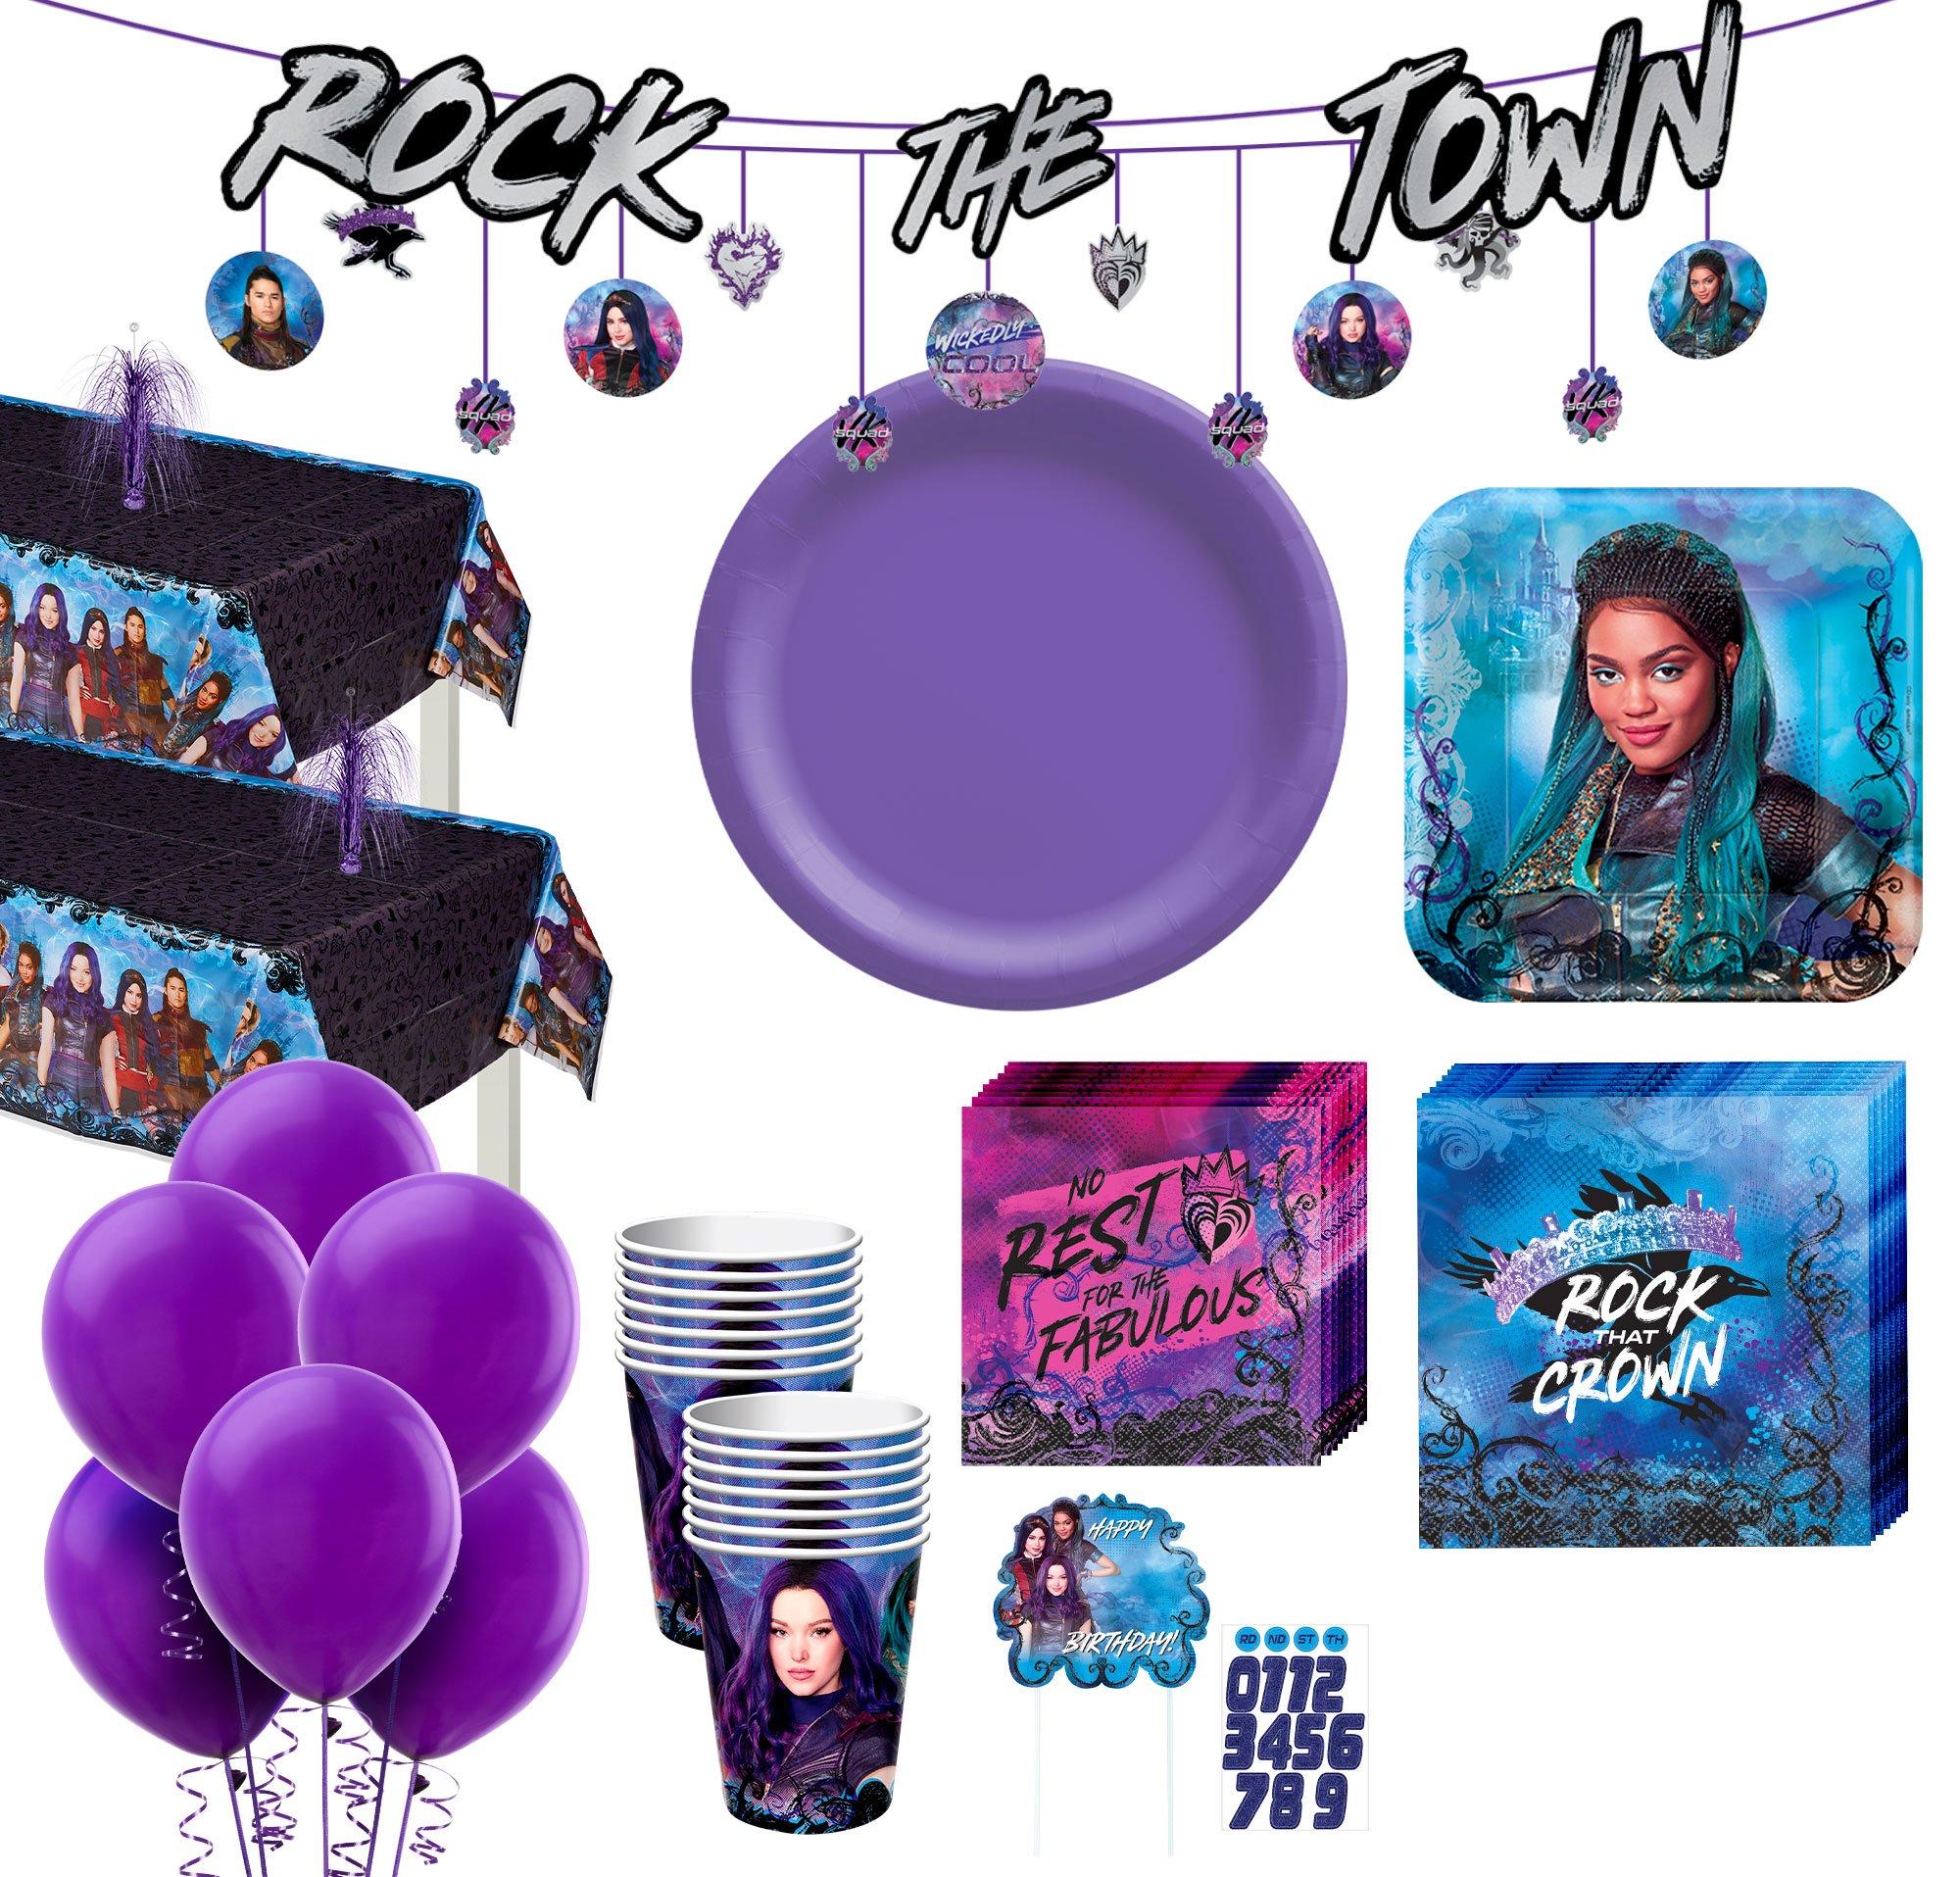 Disney Descendants birthday party ideas and themed supplies